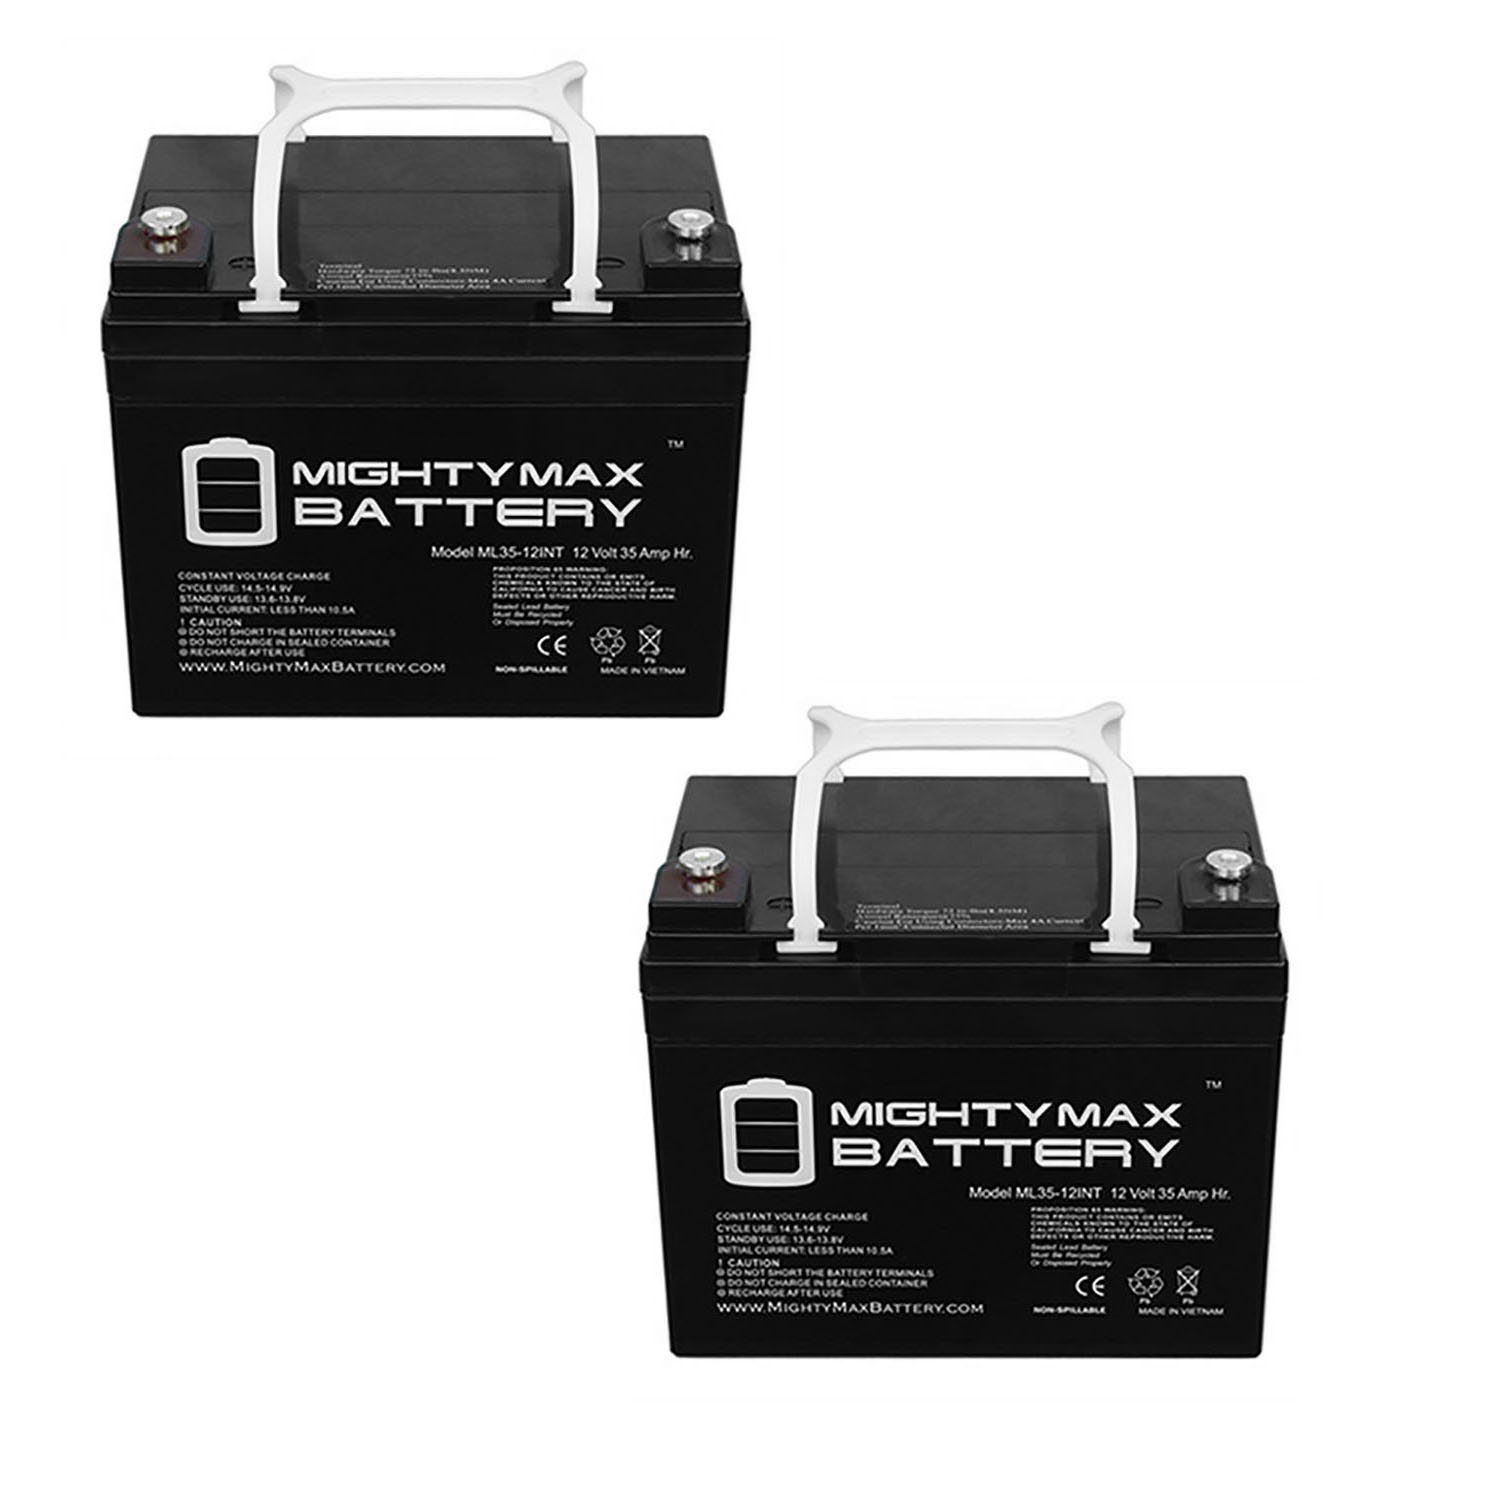 12V 35AH INT Replacement Battery for Honeywell PWPS12330 - 2 Pack